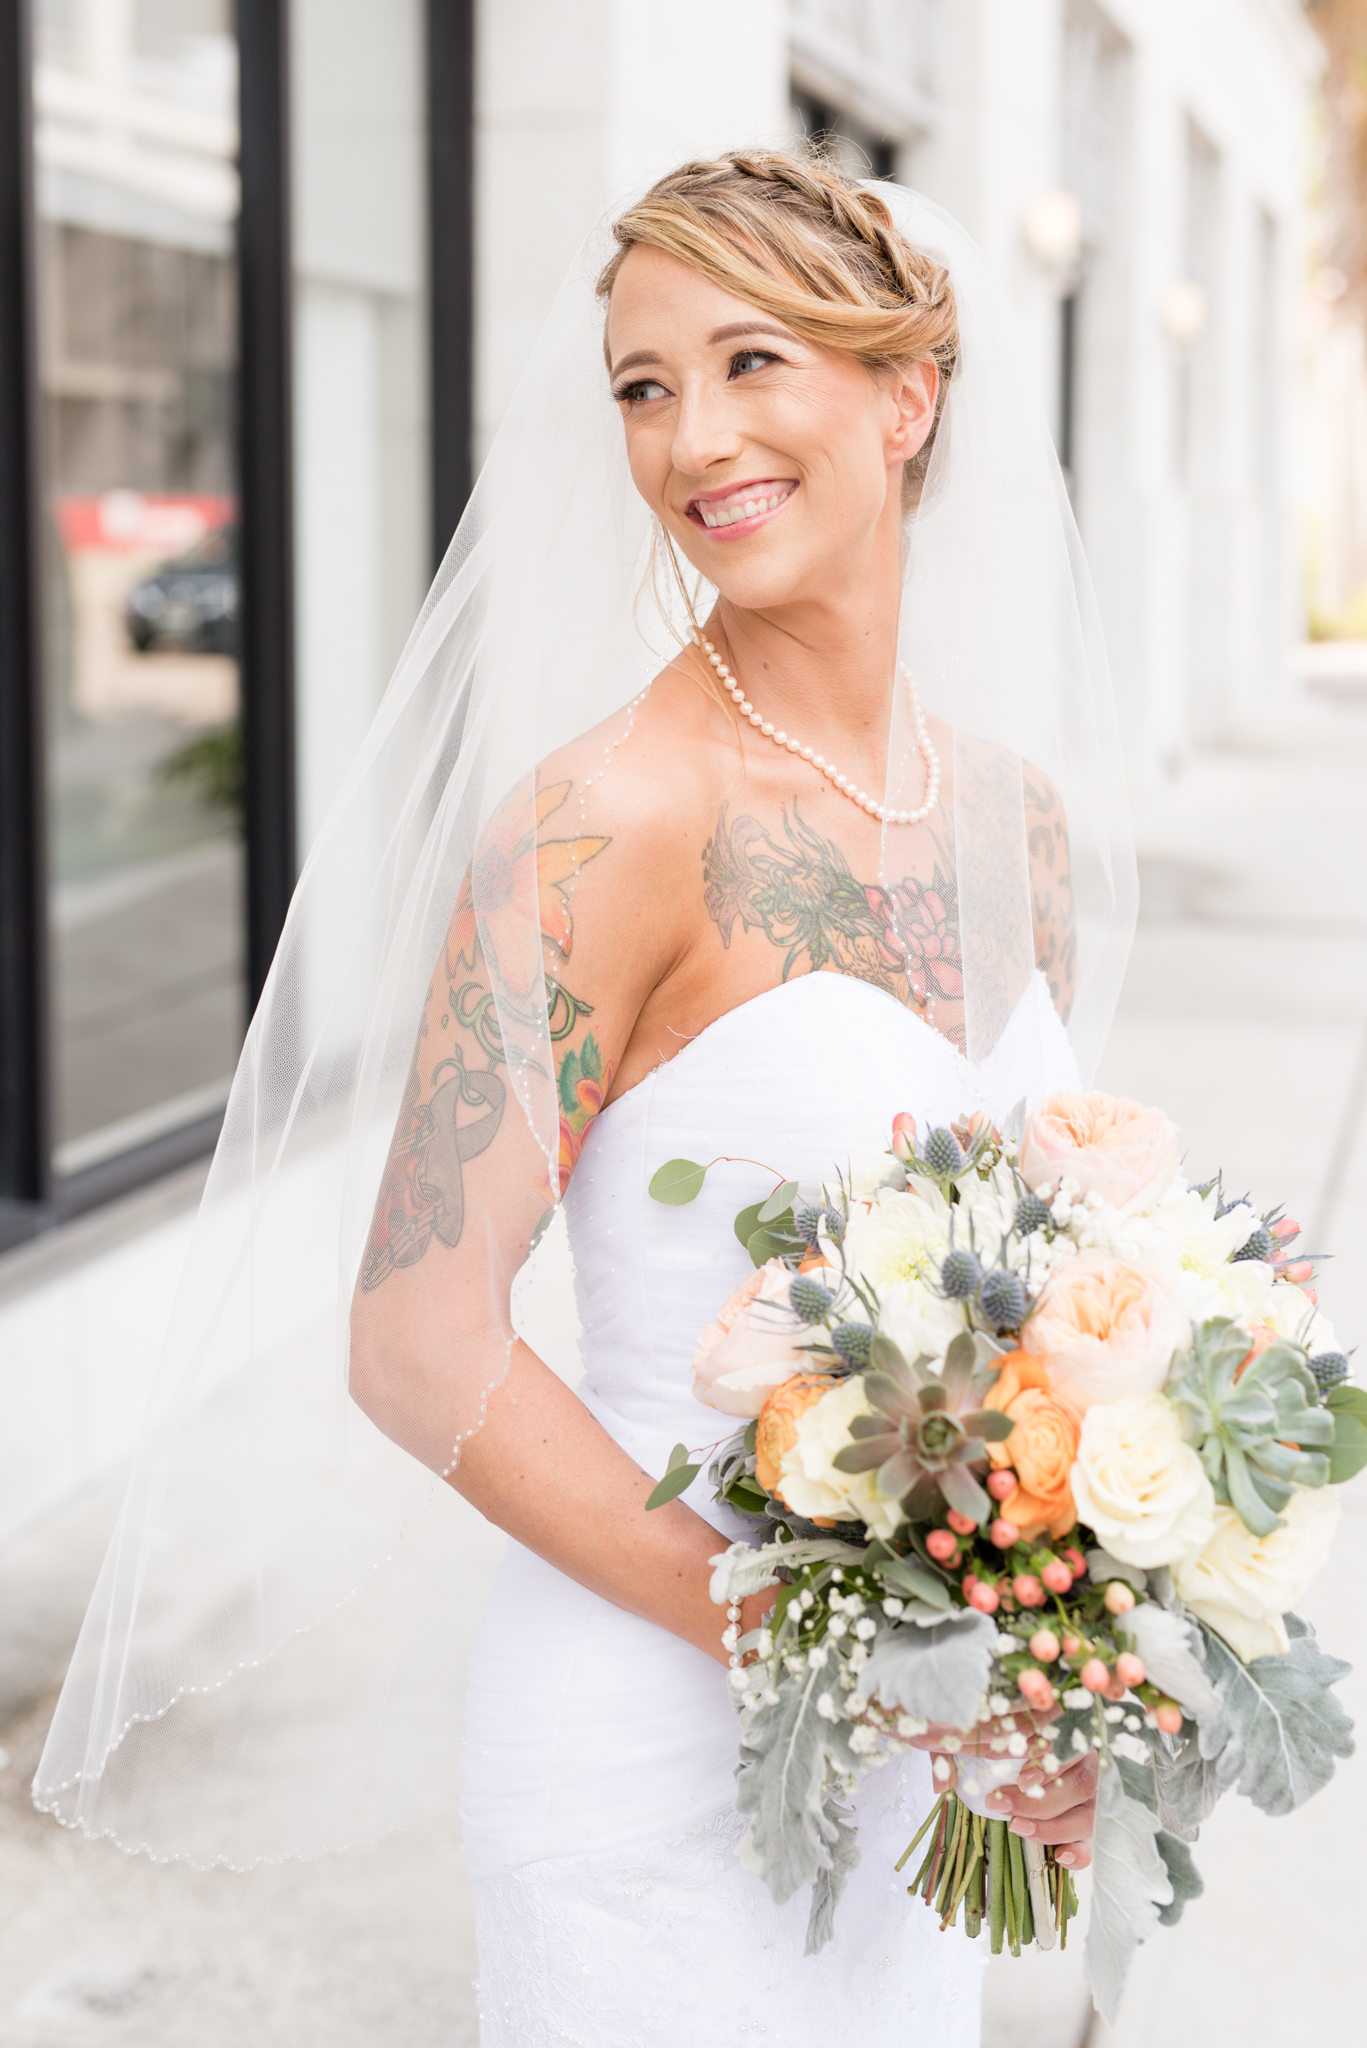 Bride looks over shoulder and smiles.